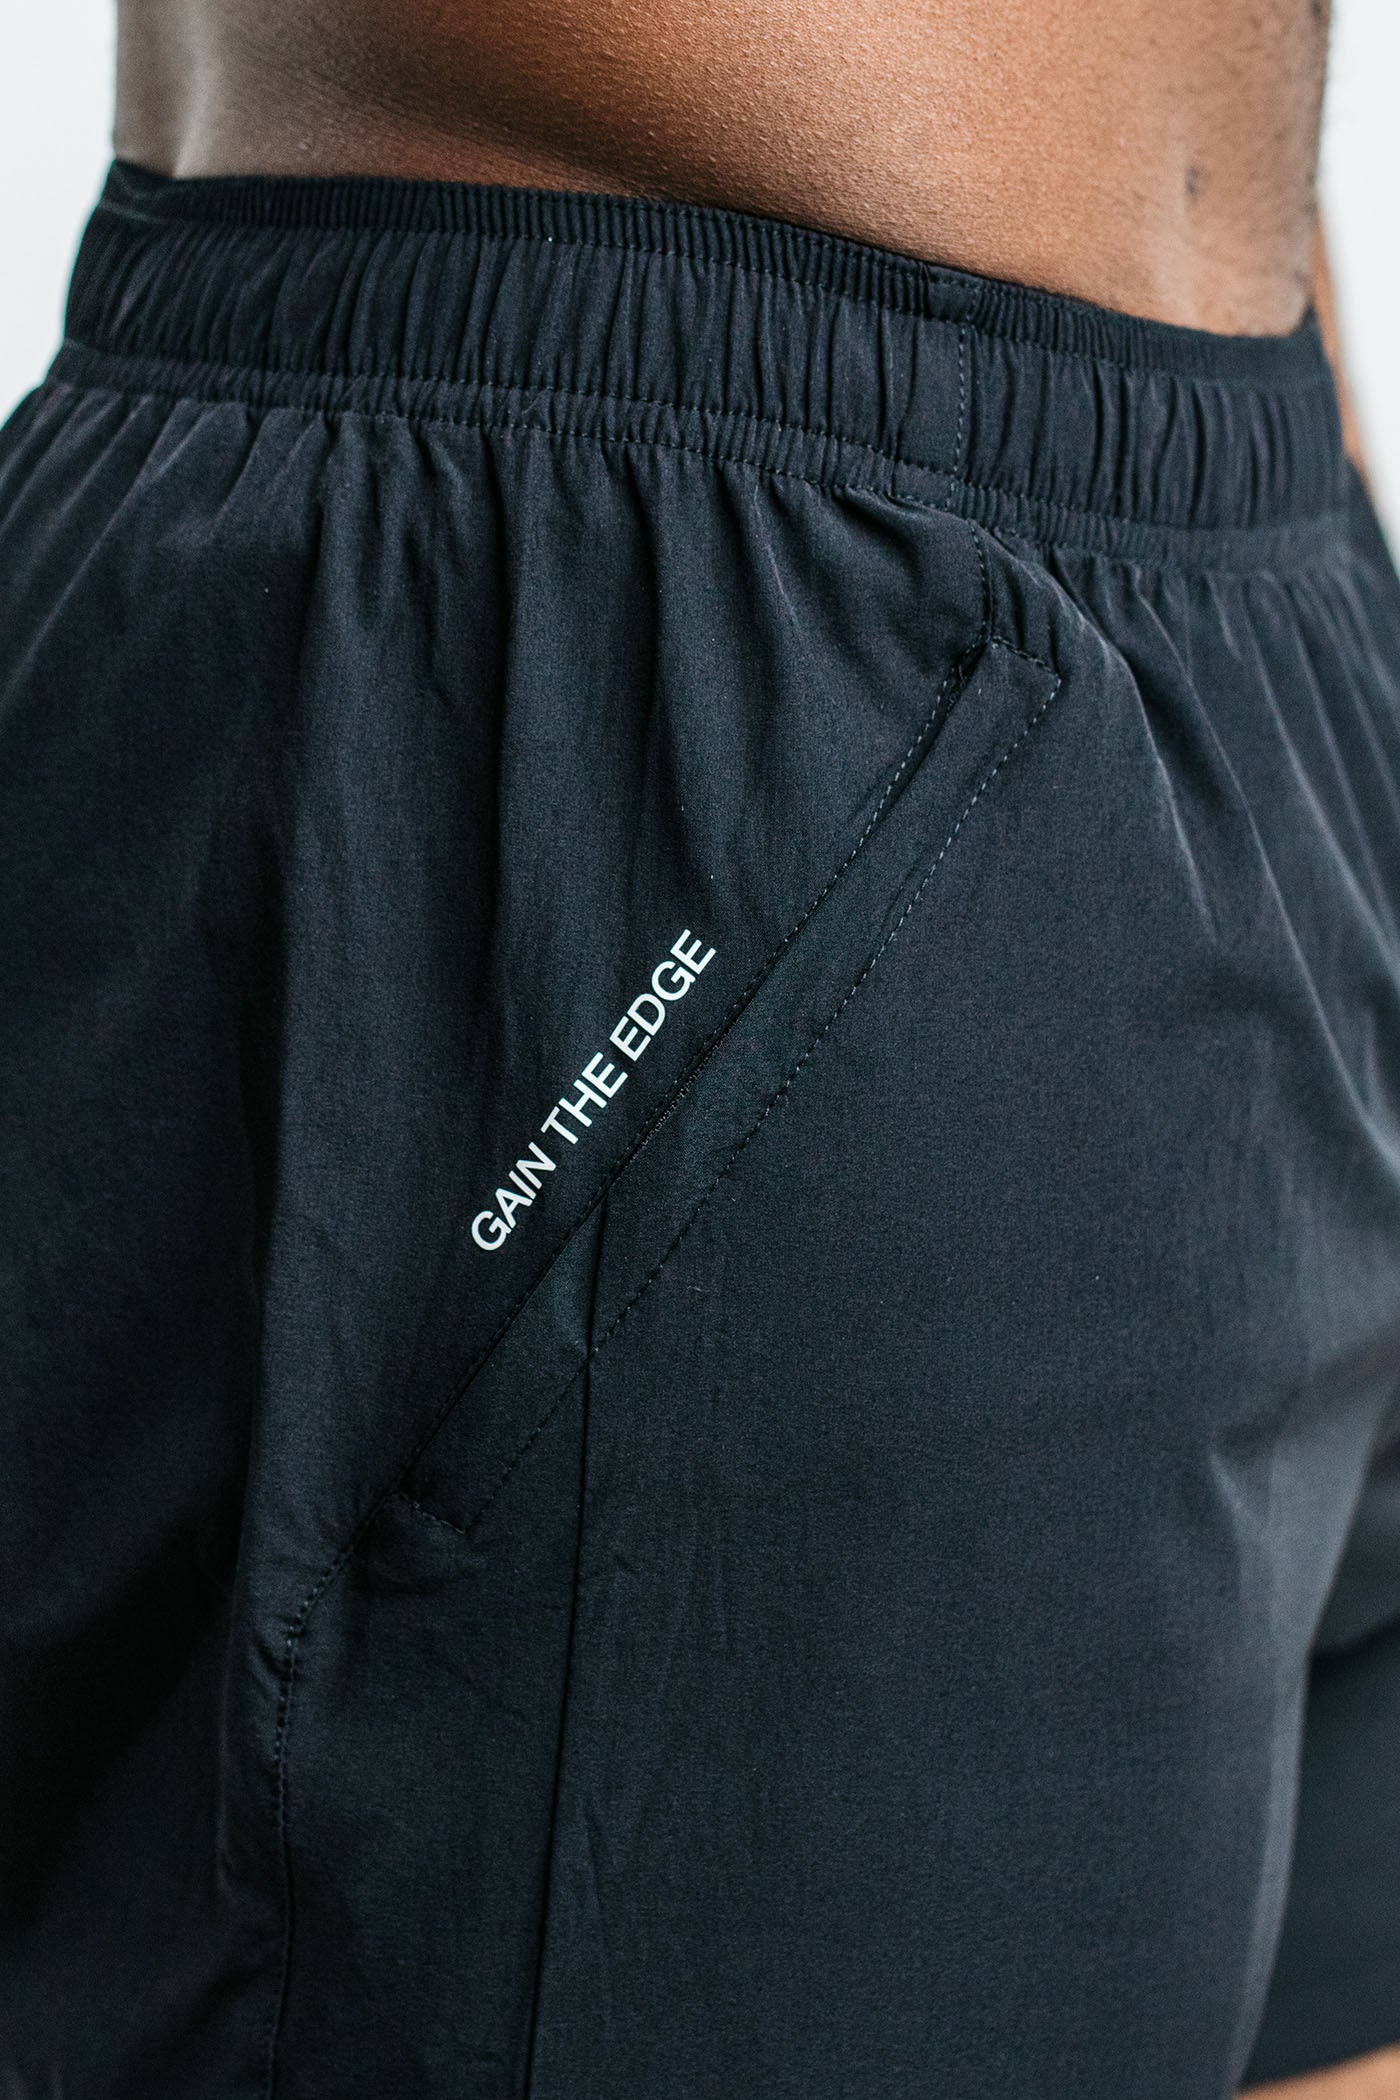 Performance Shorts - Gain The Edge Official